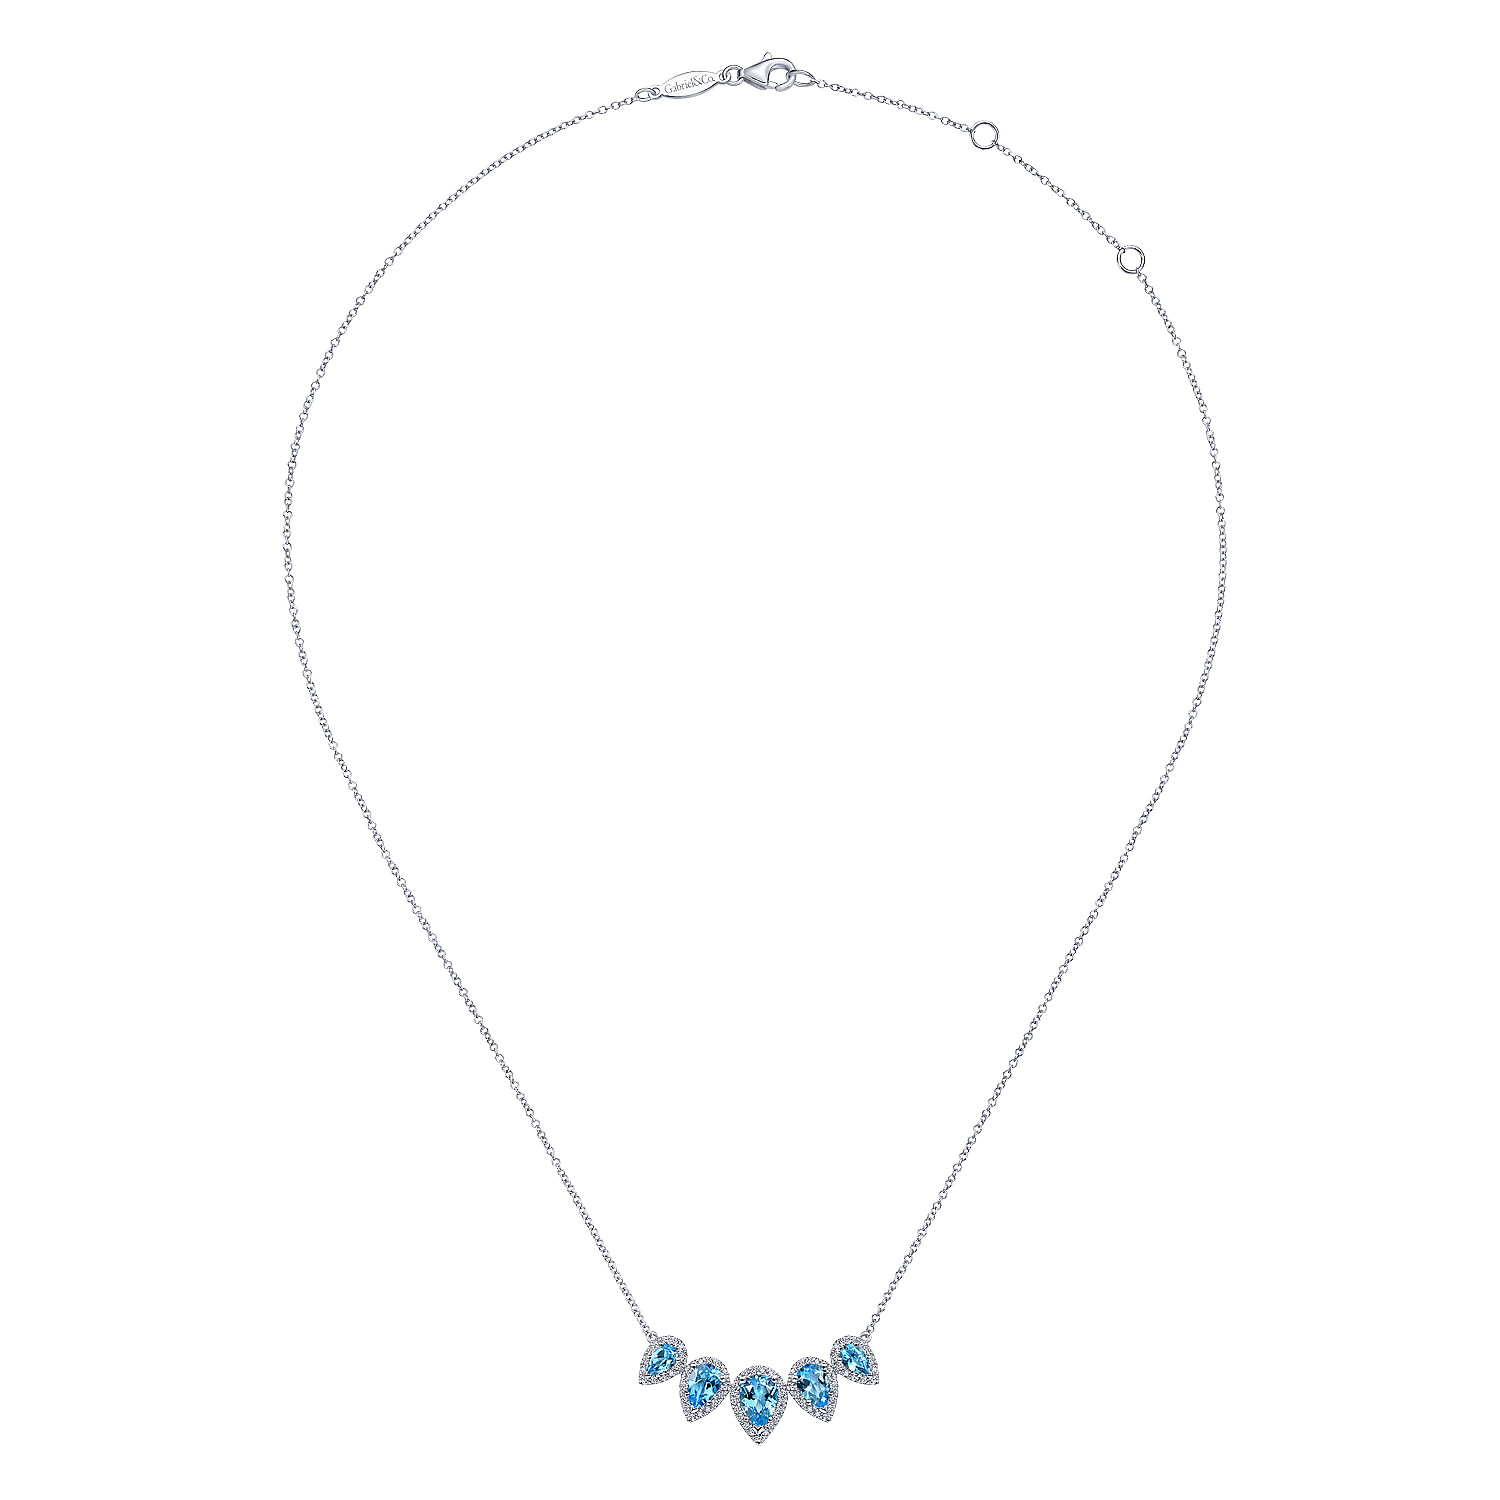 Graduating 14K White Gold Pear Shaped Blue Topaz and Diamond Halo Necklace